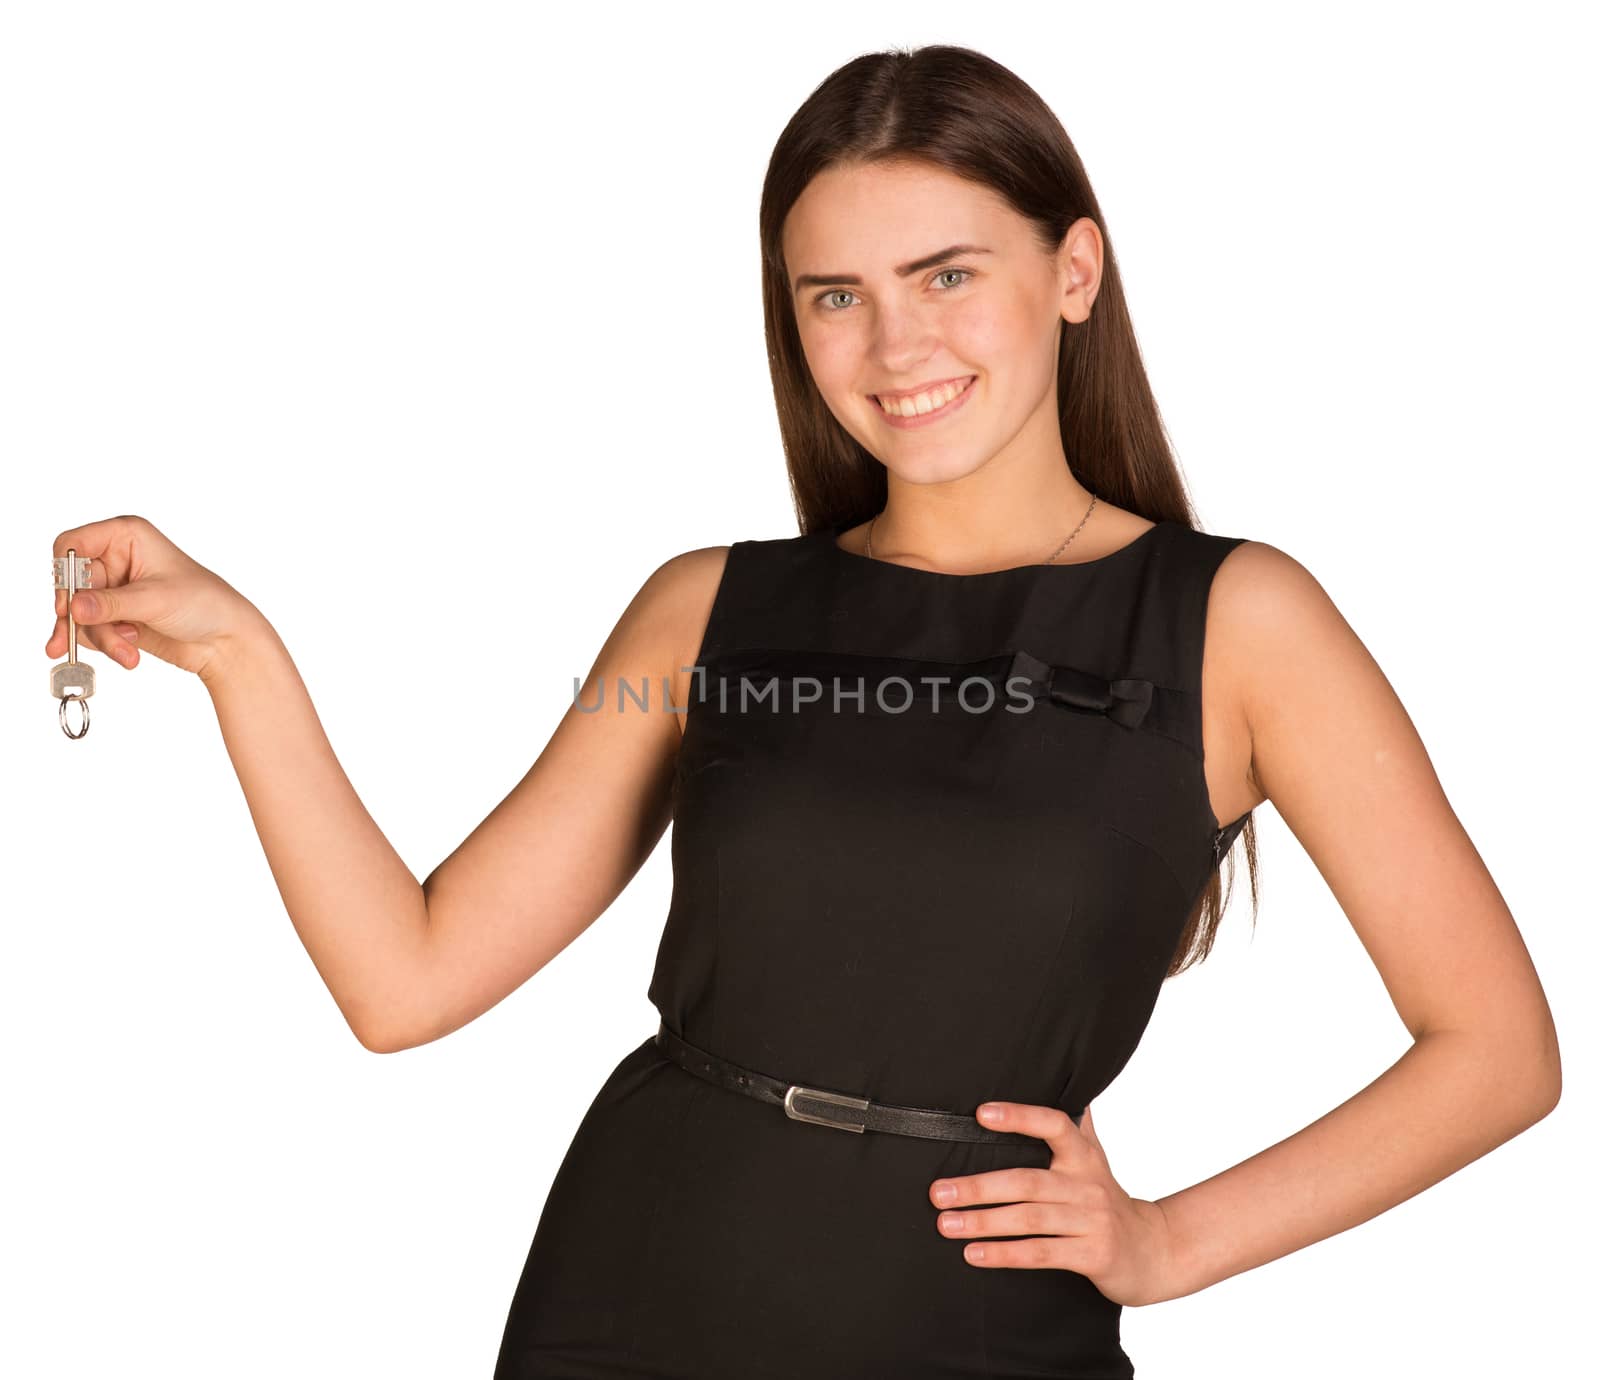 Businesswoman in dress holding house key. Isolated on white background